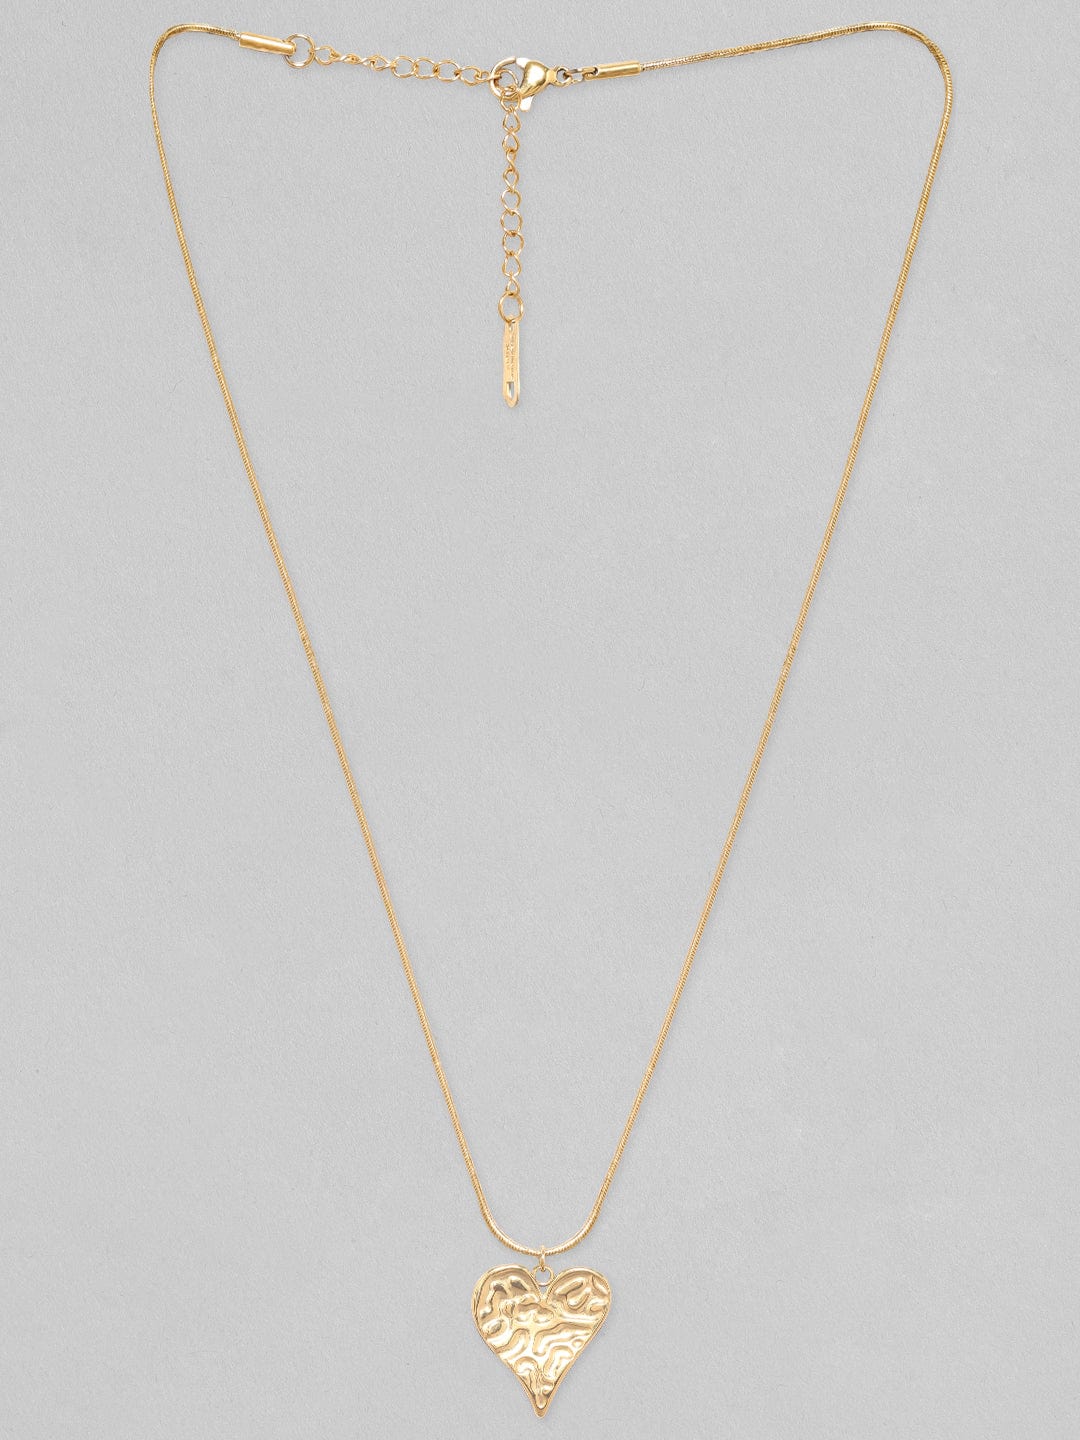 Rubans Voguish 18K Gold Plated Chain With Textured Heart Pendant Necklace. Chain & Necklaces